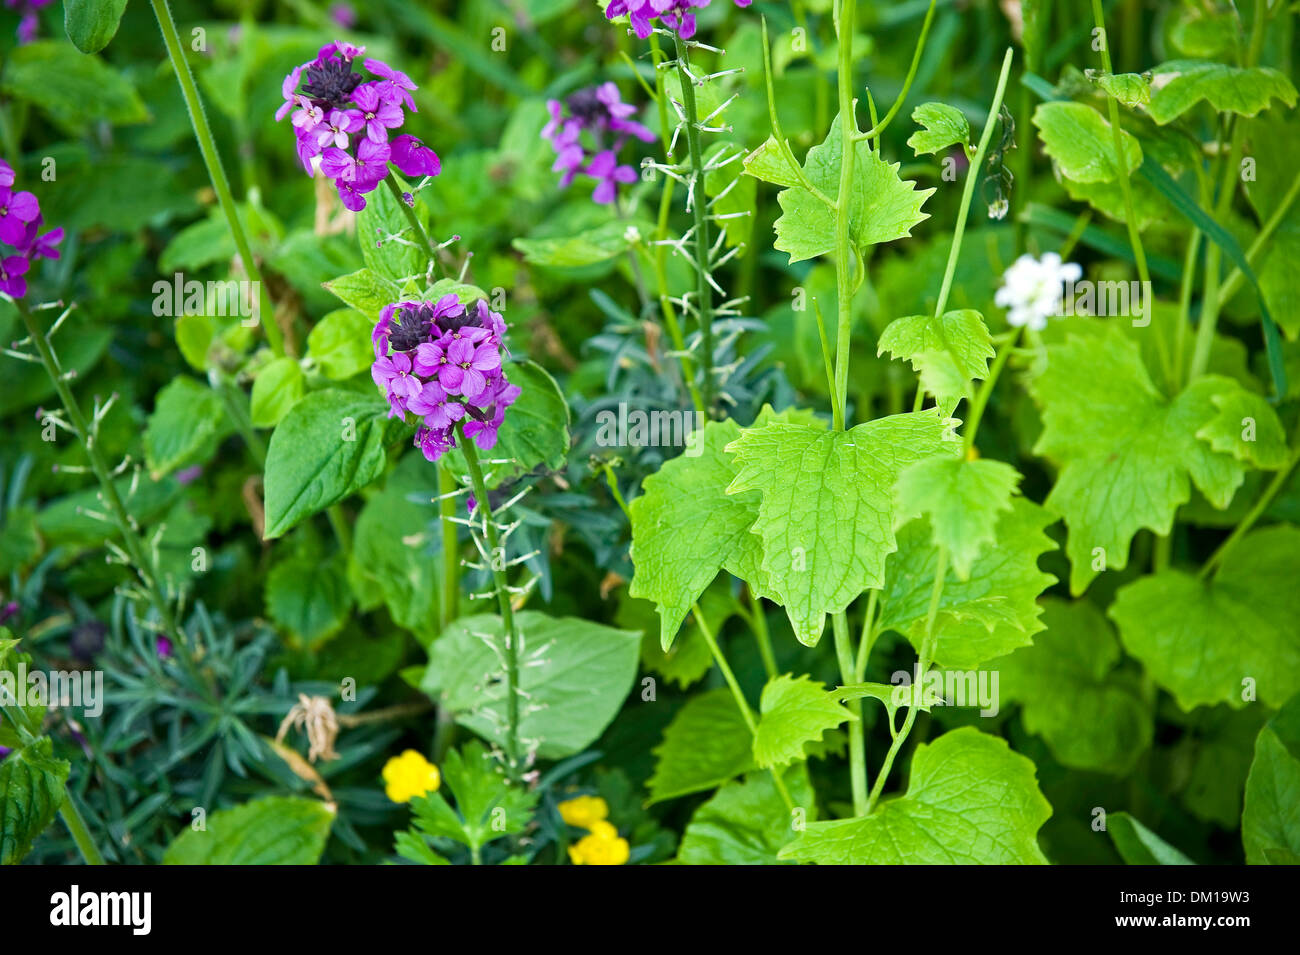 Wild flowers and plants growing in a Welsh garden. Stock Photo